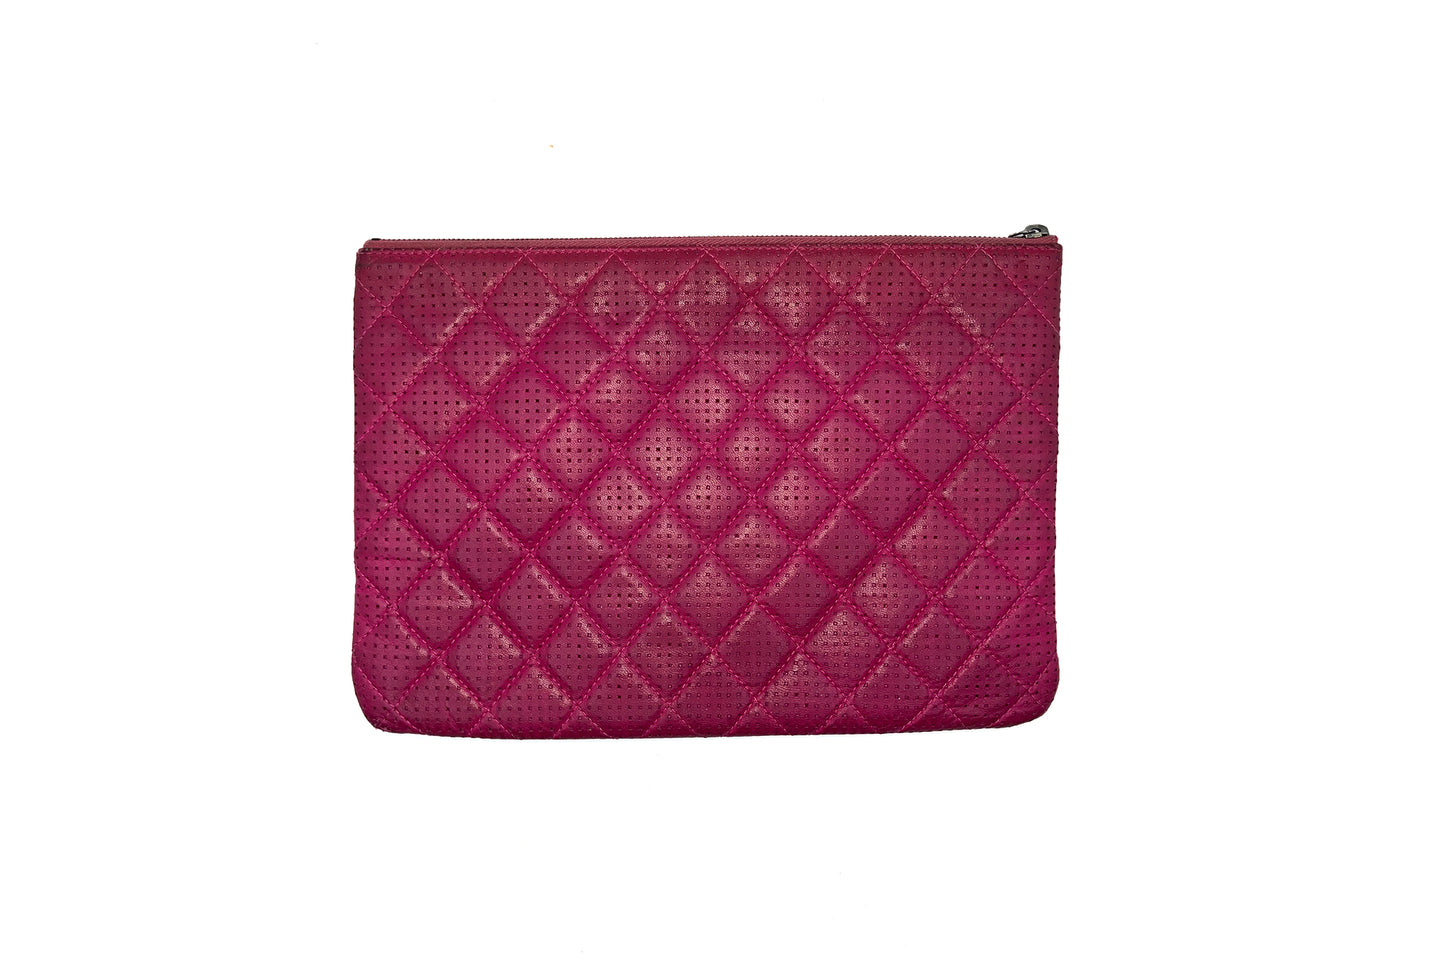 Chanel Ocase Quilted Hollow Leather